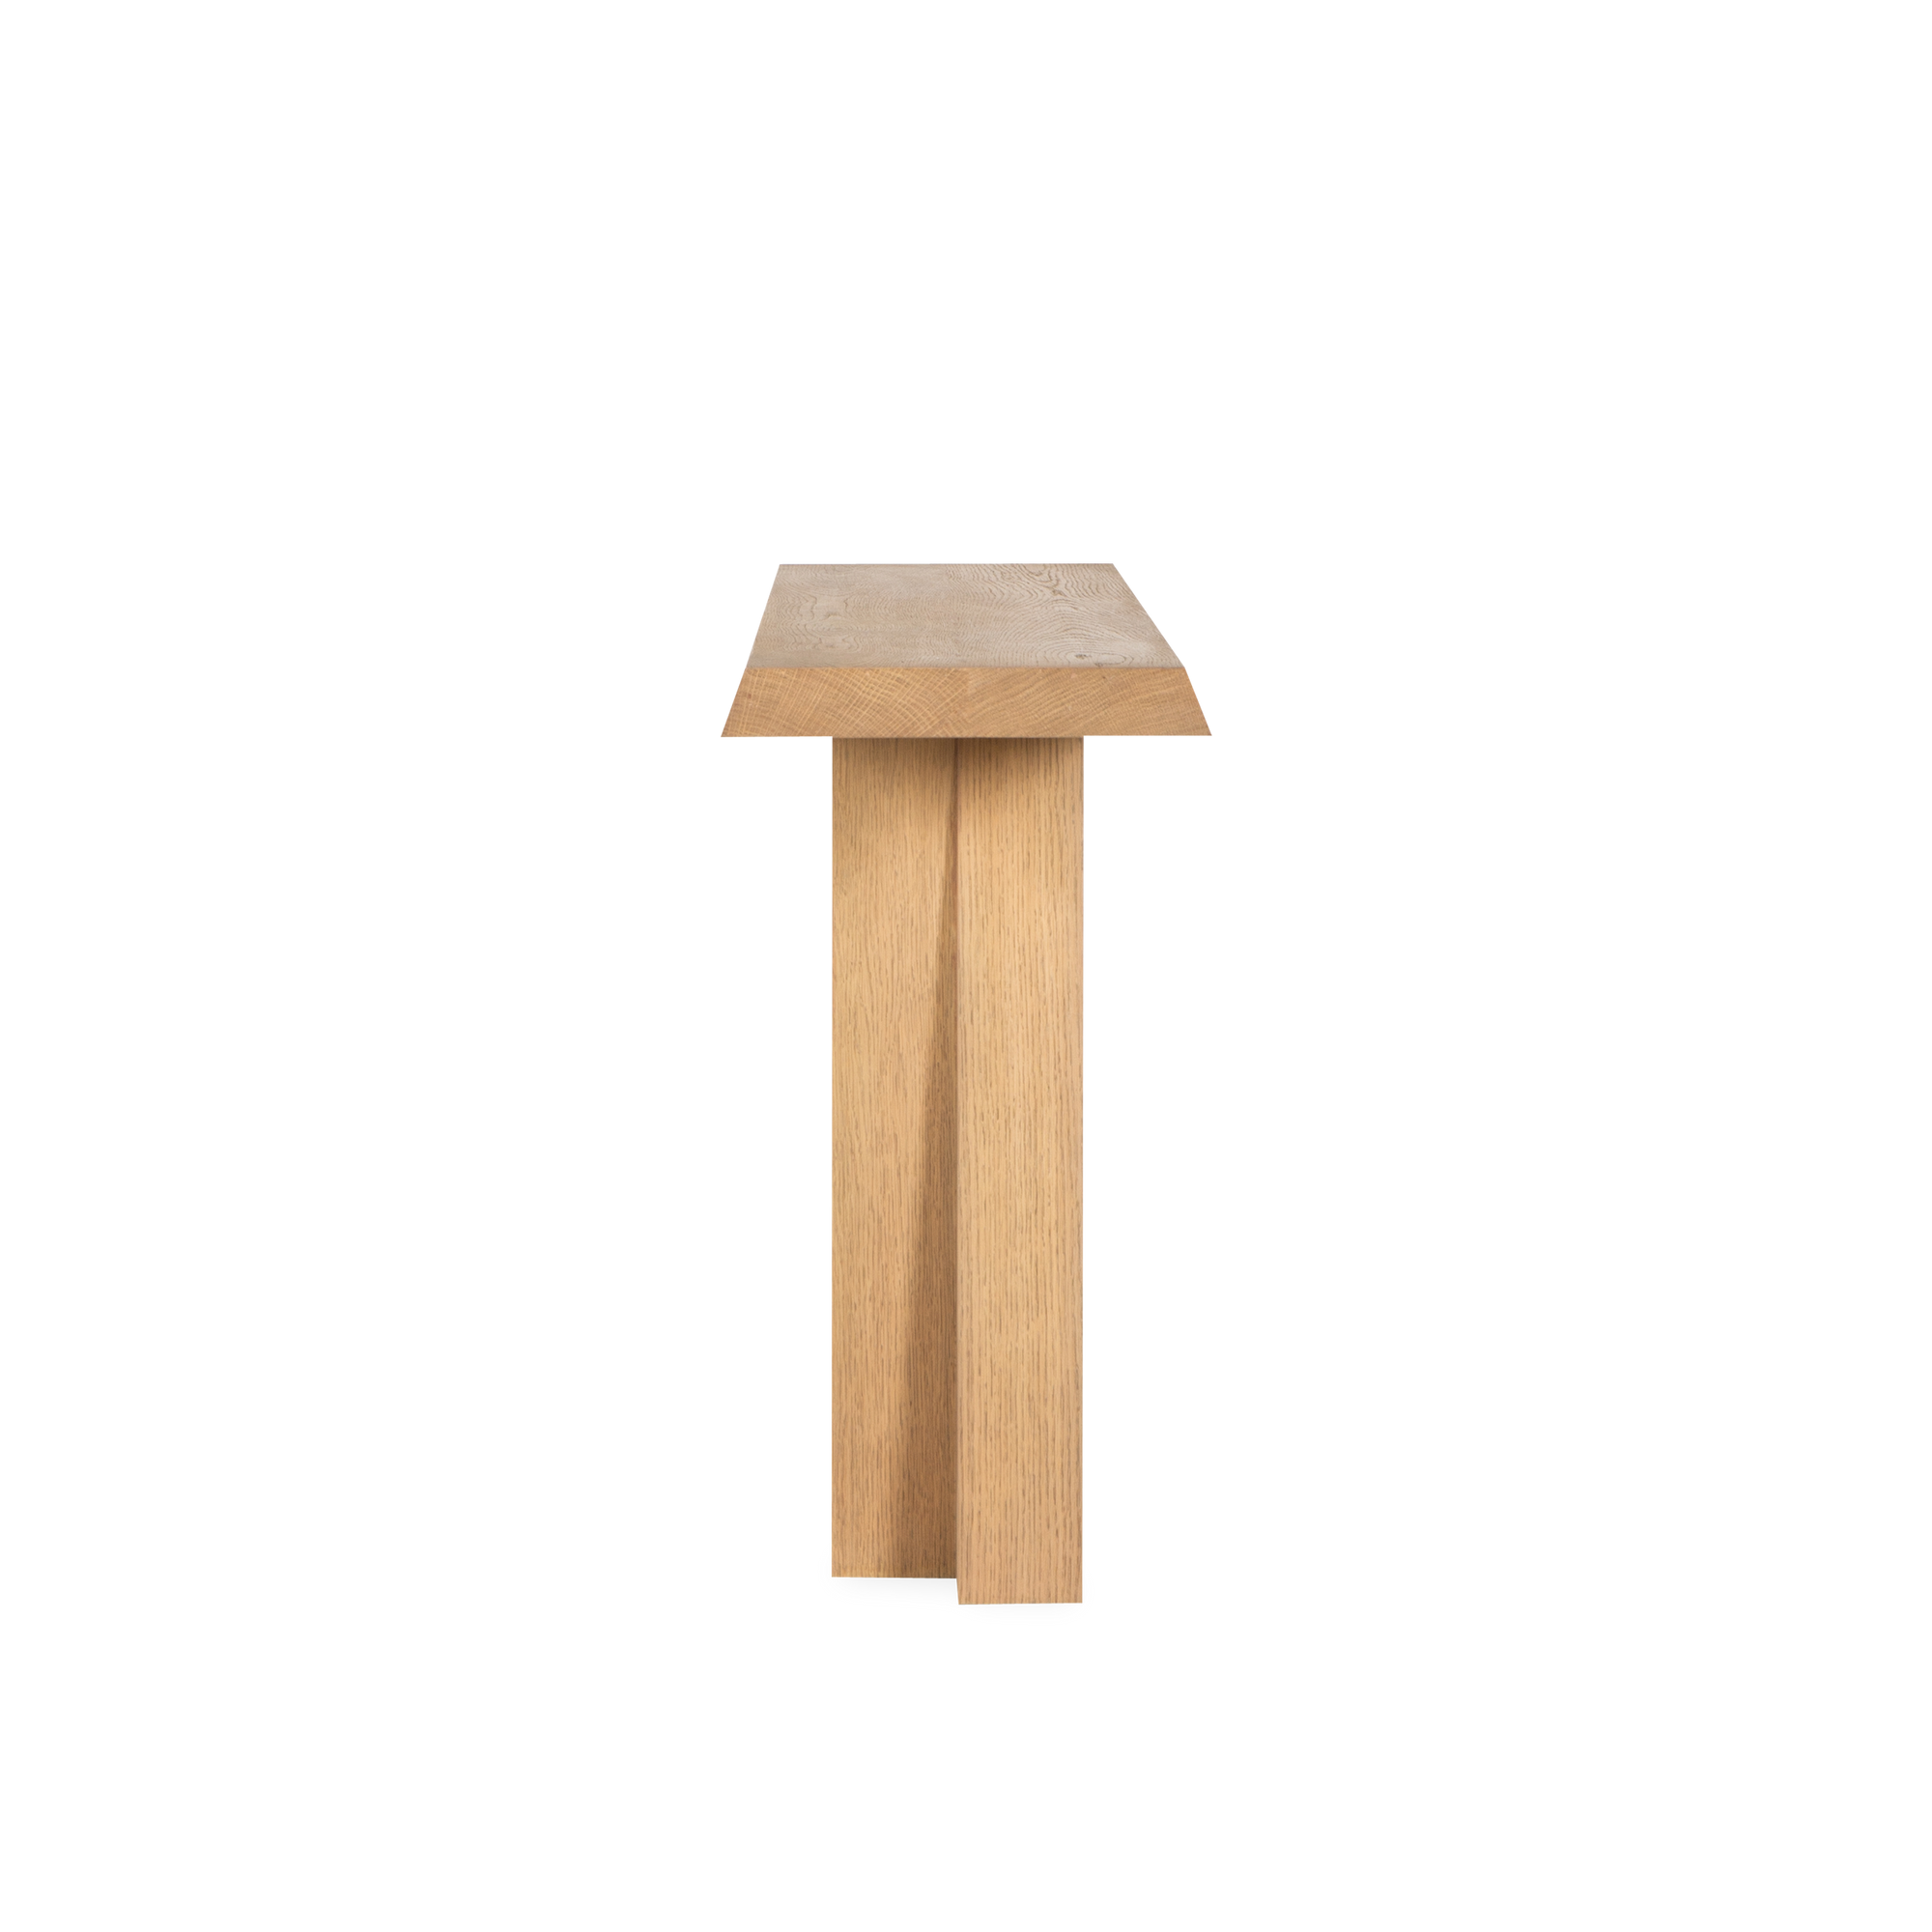 The Oblique Console Table draws inspiration from the raw power and geometric precision of 1960s Brutalist architecture.